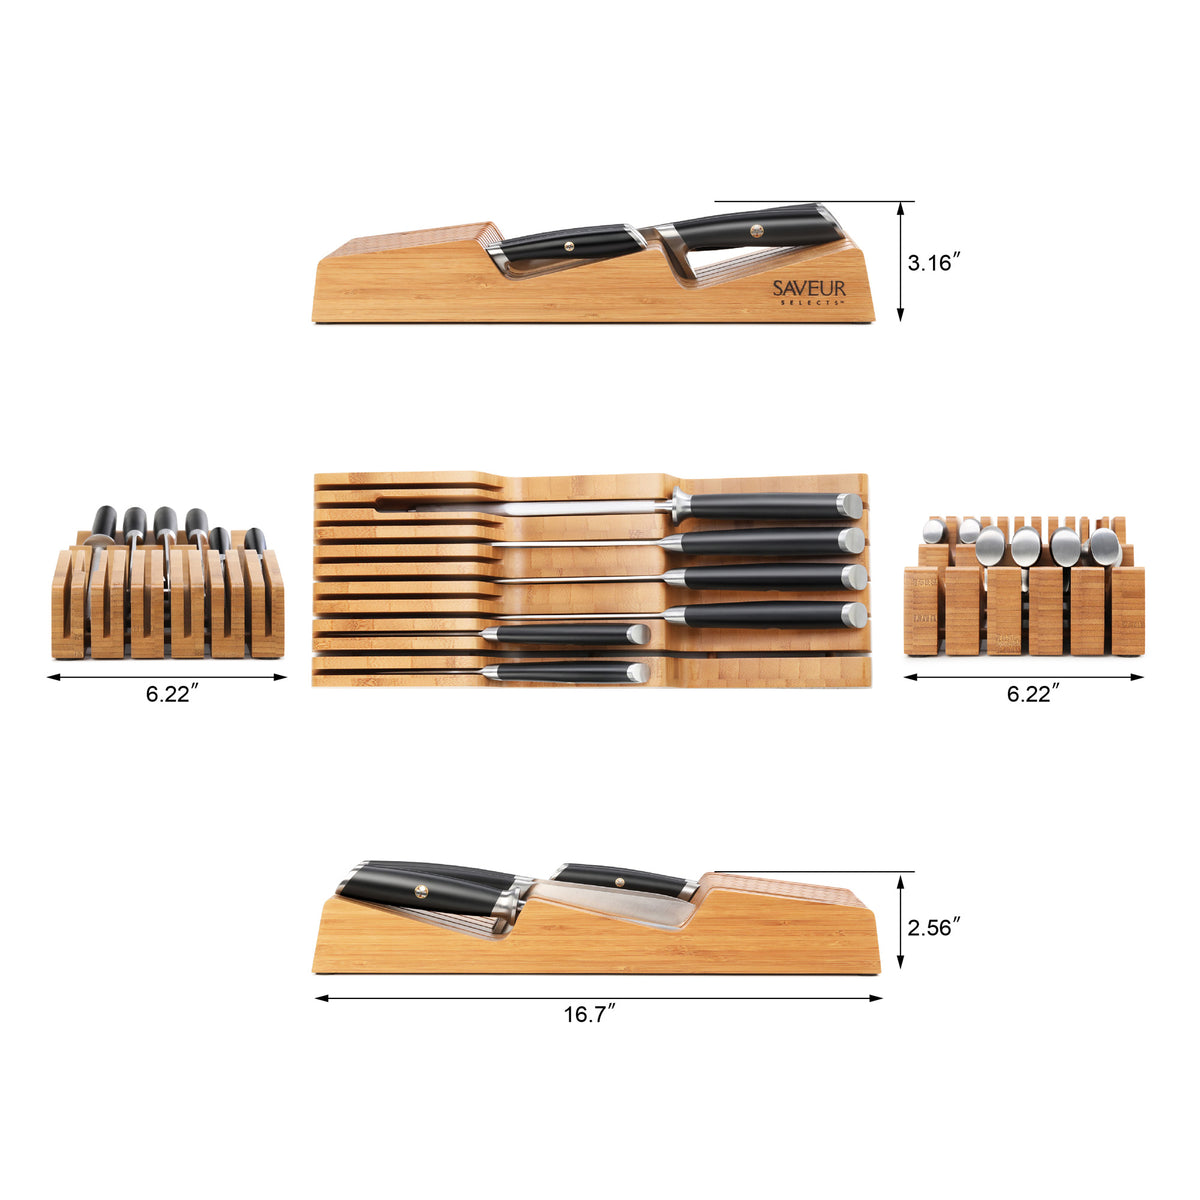 Scanpan Sax 6 Piece Acacia Knife Block Set With Sharpener - Kay Apparel  Aprons And Home Butchers Supplies